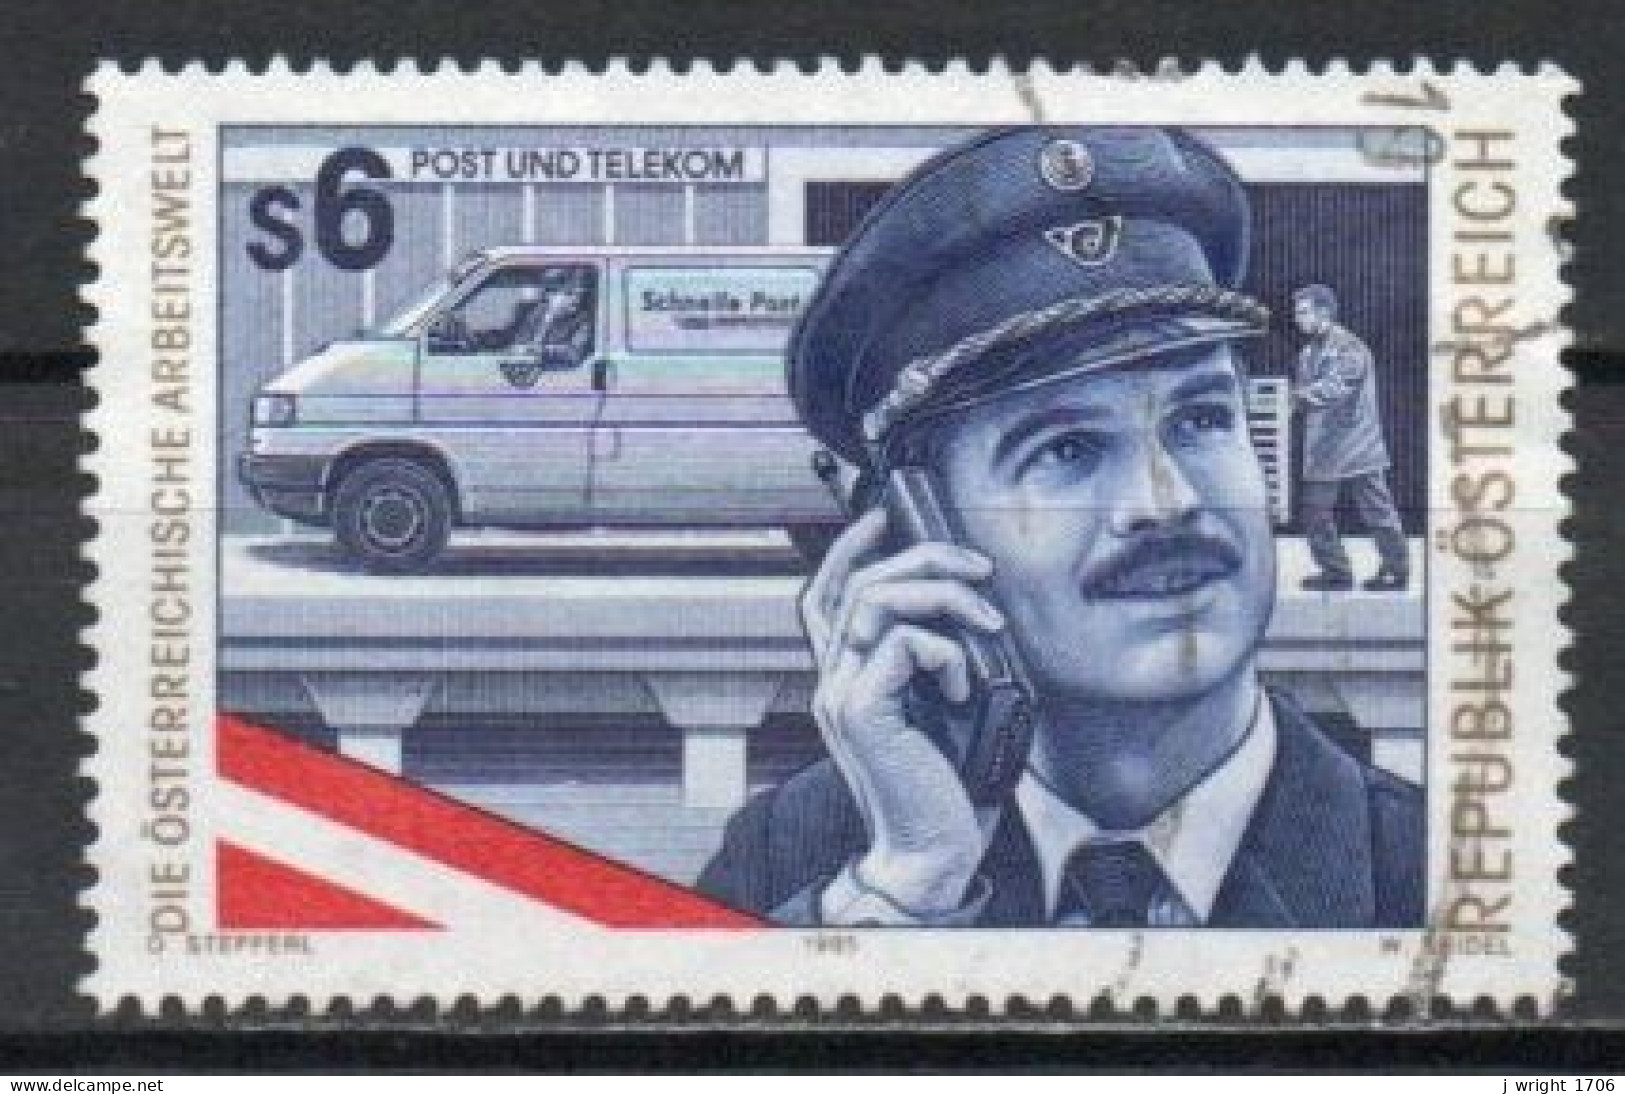 Austria, 1995, Working Environment Post Office Official, 6s, USED - Gebruikt